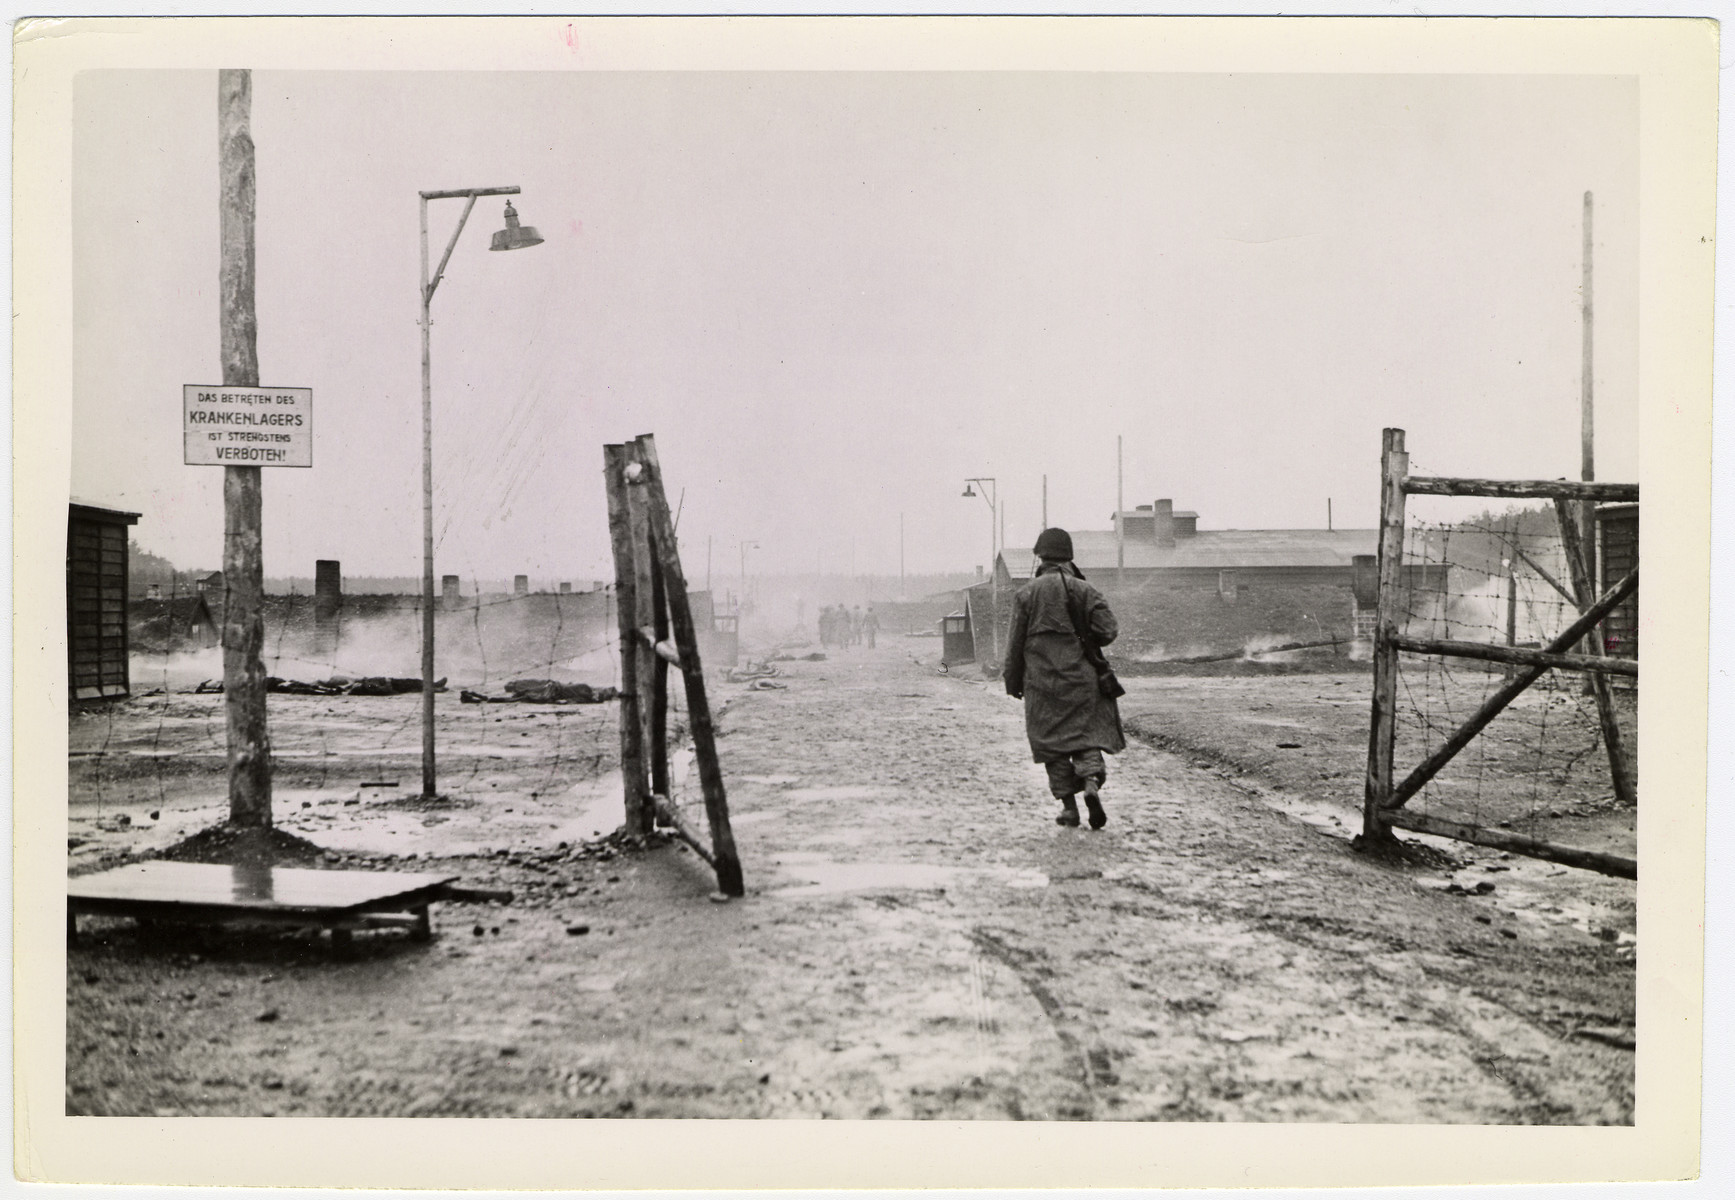 An American soldier follows others into the still smoldering ruins of the Landsberg (Kaufering Lager I) concentration camp, sub-camp of Dachau.

Original caption reads: "Landsberg atrocity: 7th U.S. Army troops enter the smoking ruins of the Landsberg concentration camp. Before American forces captured the camp, German guards locked their prisoners in the wooden huts and set fire to them. Some burned to death in the buildings, others found strength to crawl out and die in the streets. Most prisoners were naked, but some had remnants of clothing on their charred bodies."